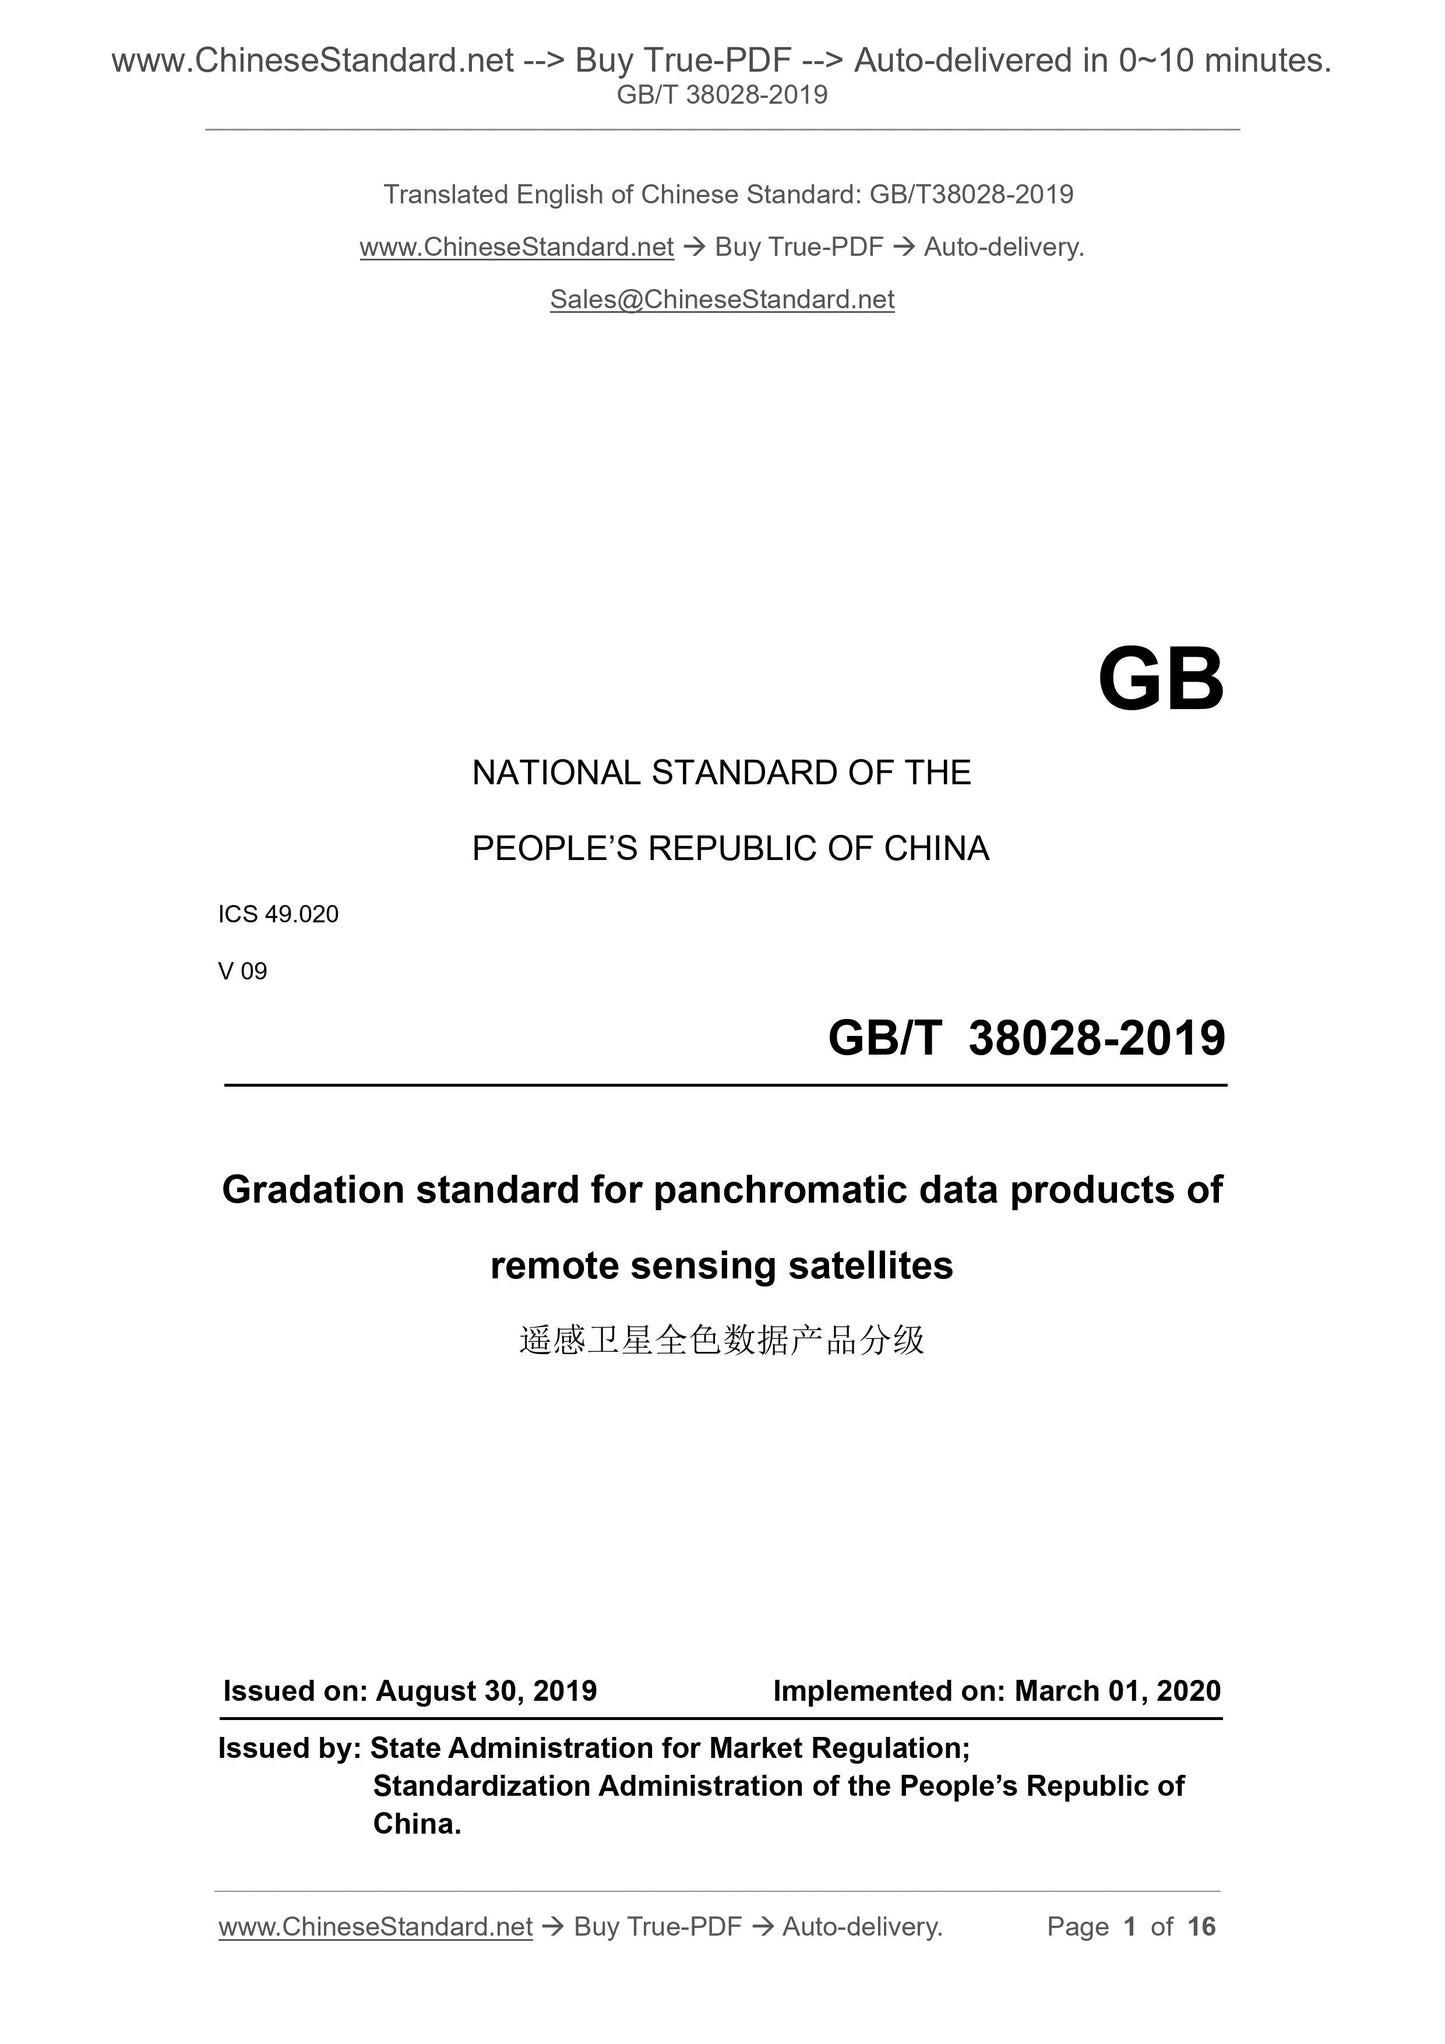 GB/T 38028-2019 Page 1